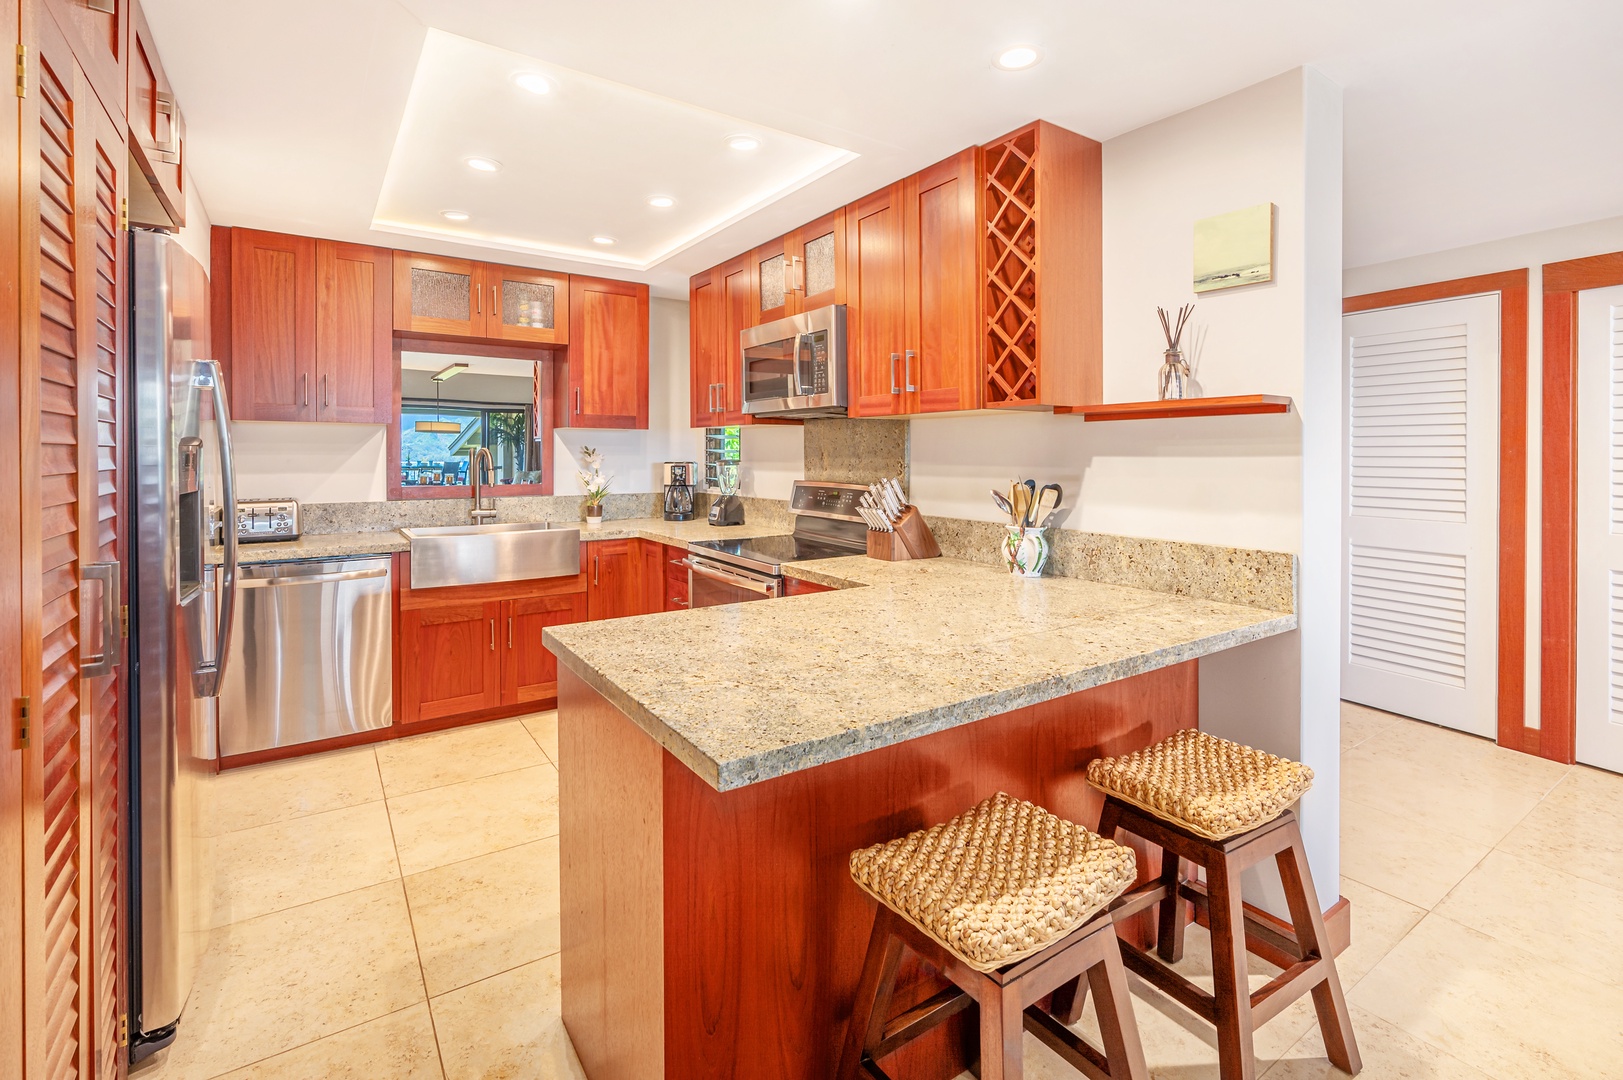 Princeville Vacation Rentals, Hanalei Bay Resort 7307 - Well equipped kitchen and bar